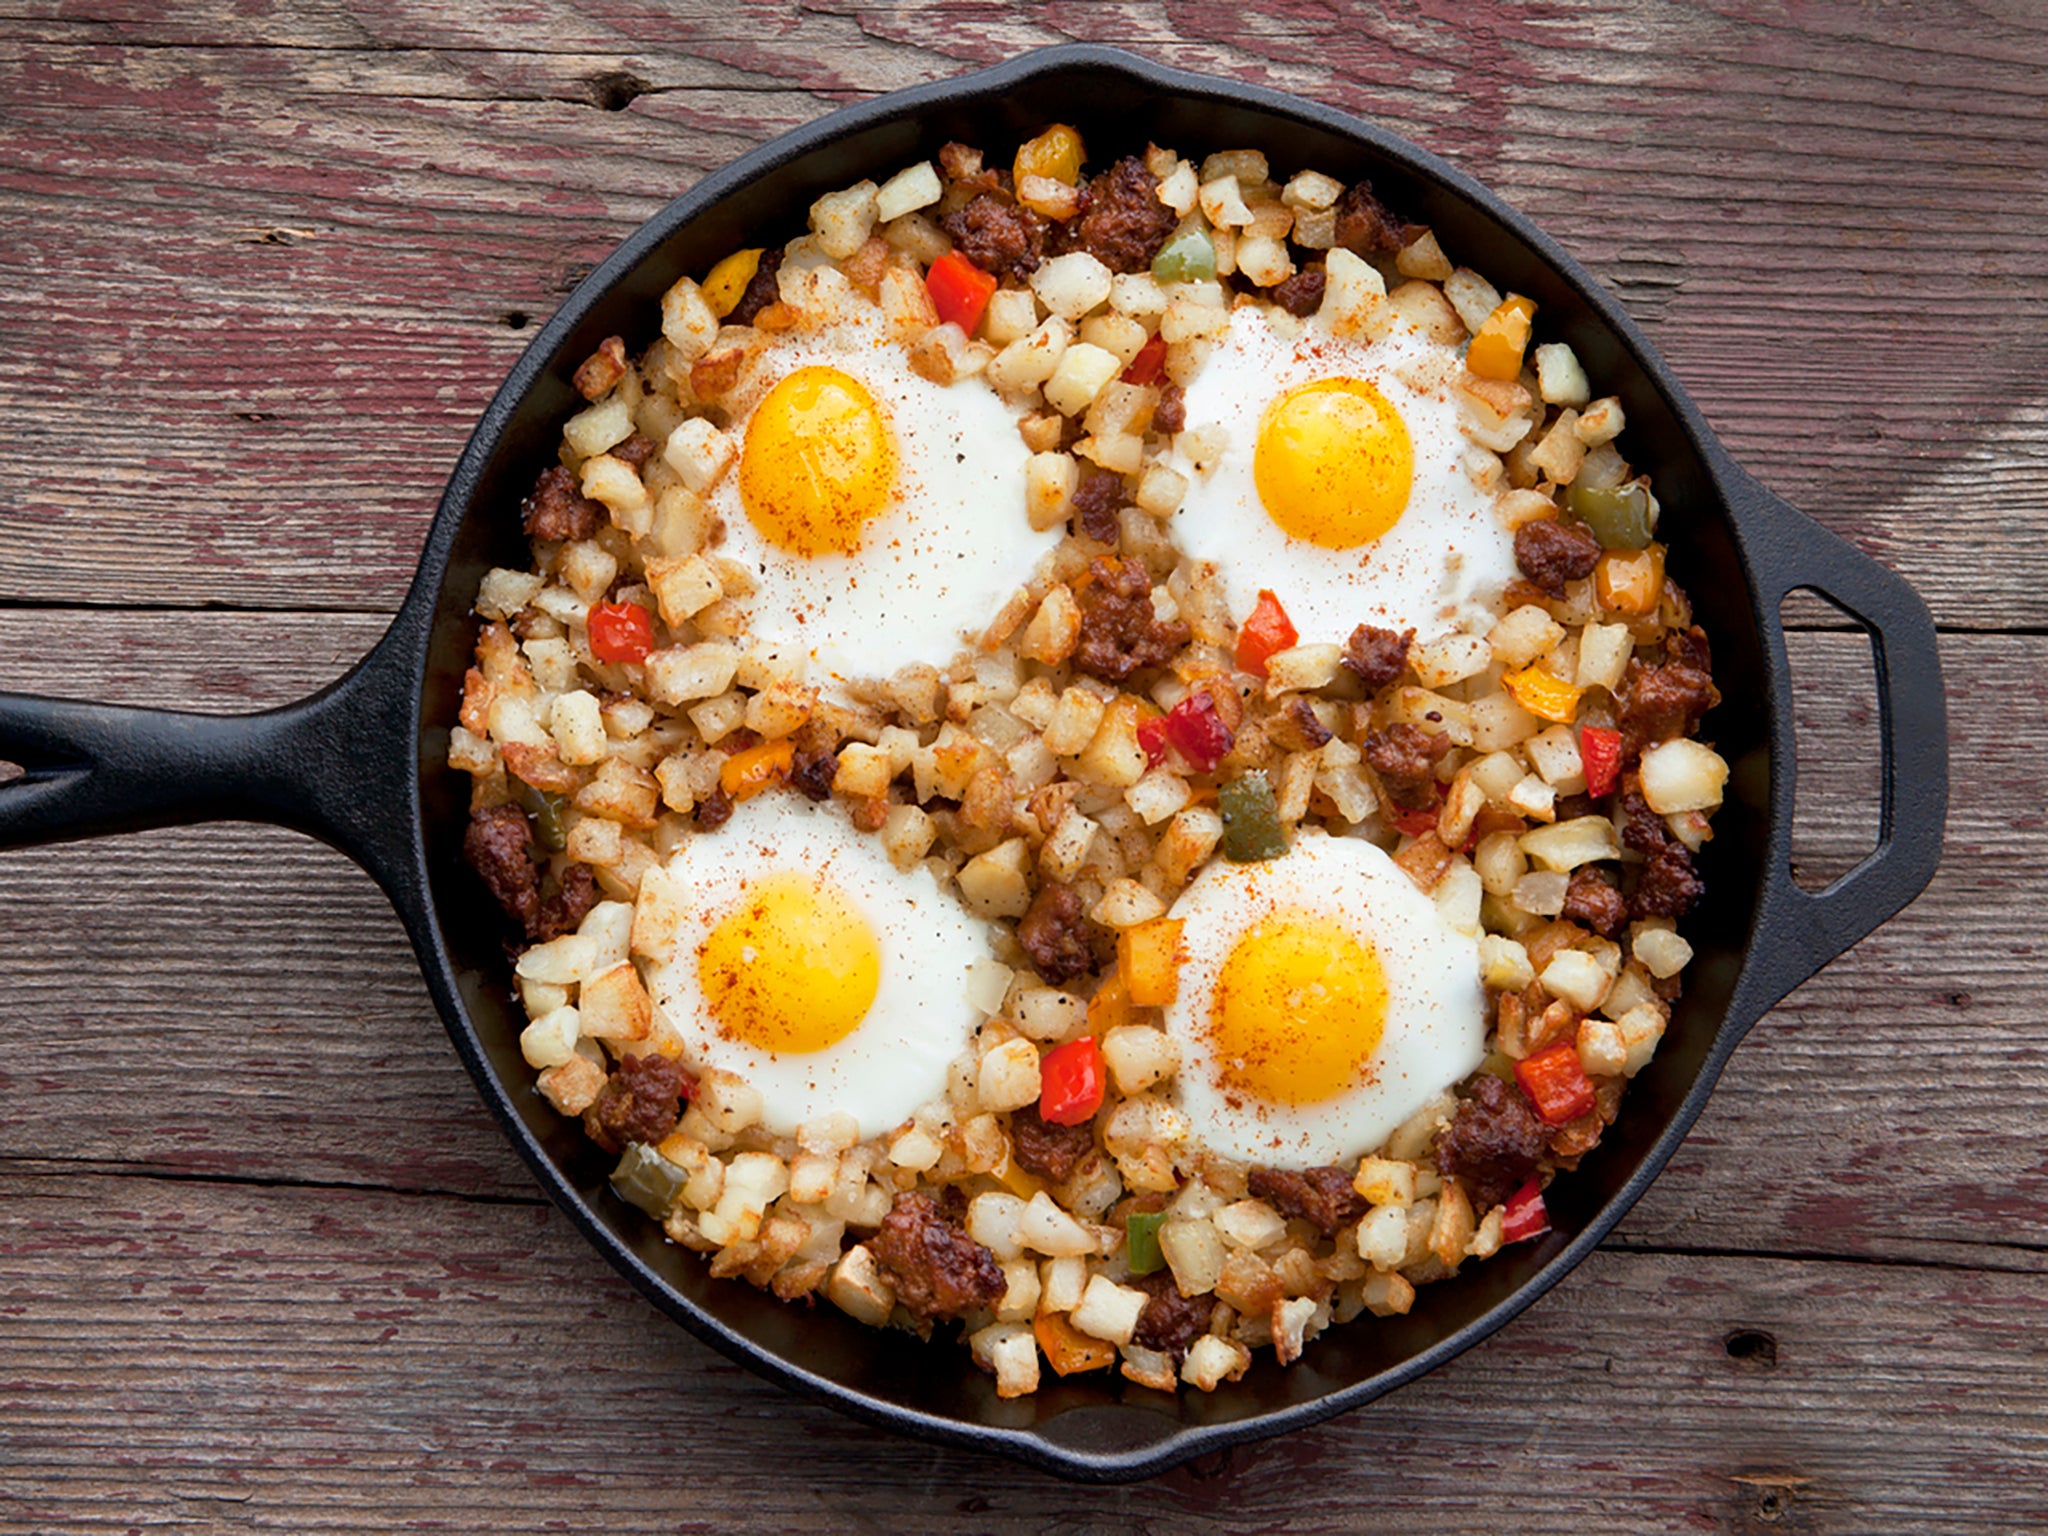 A hearty and delicious potato hash cooked in the fryer, perfect for breakfast